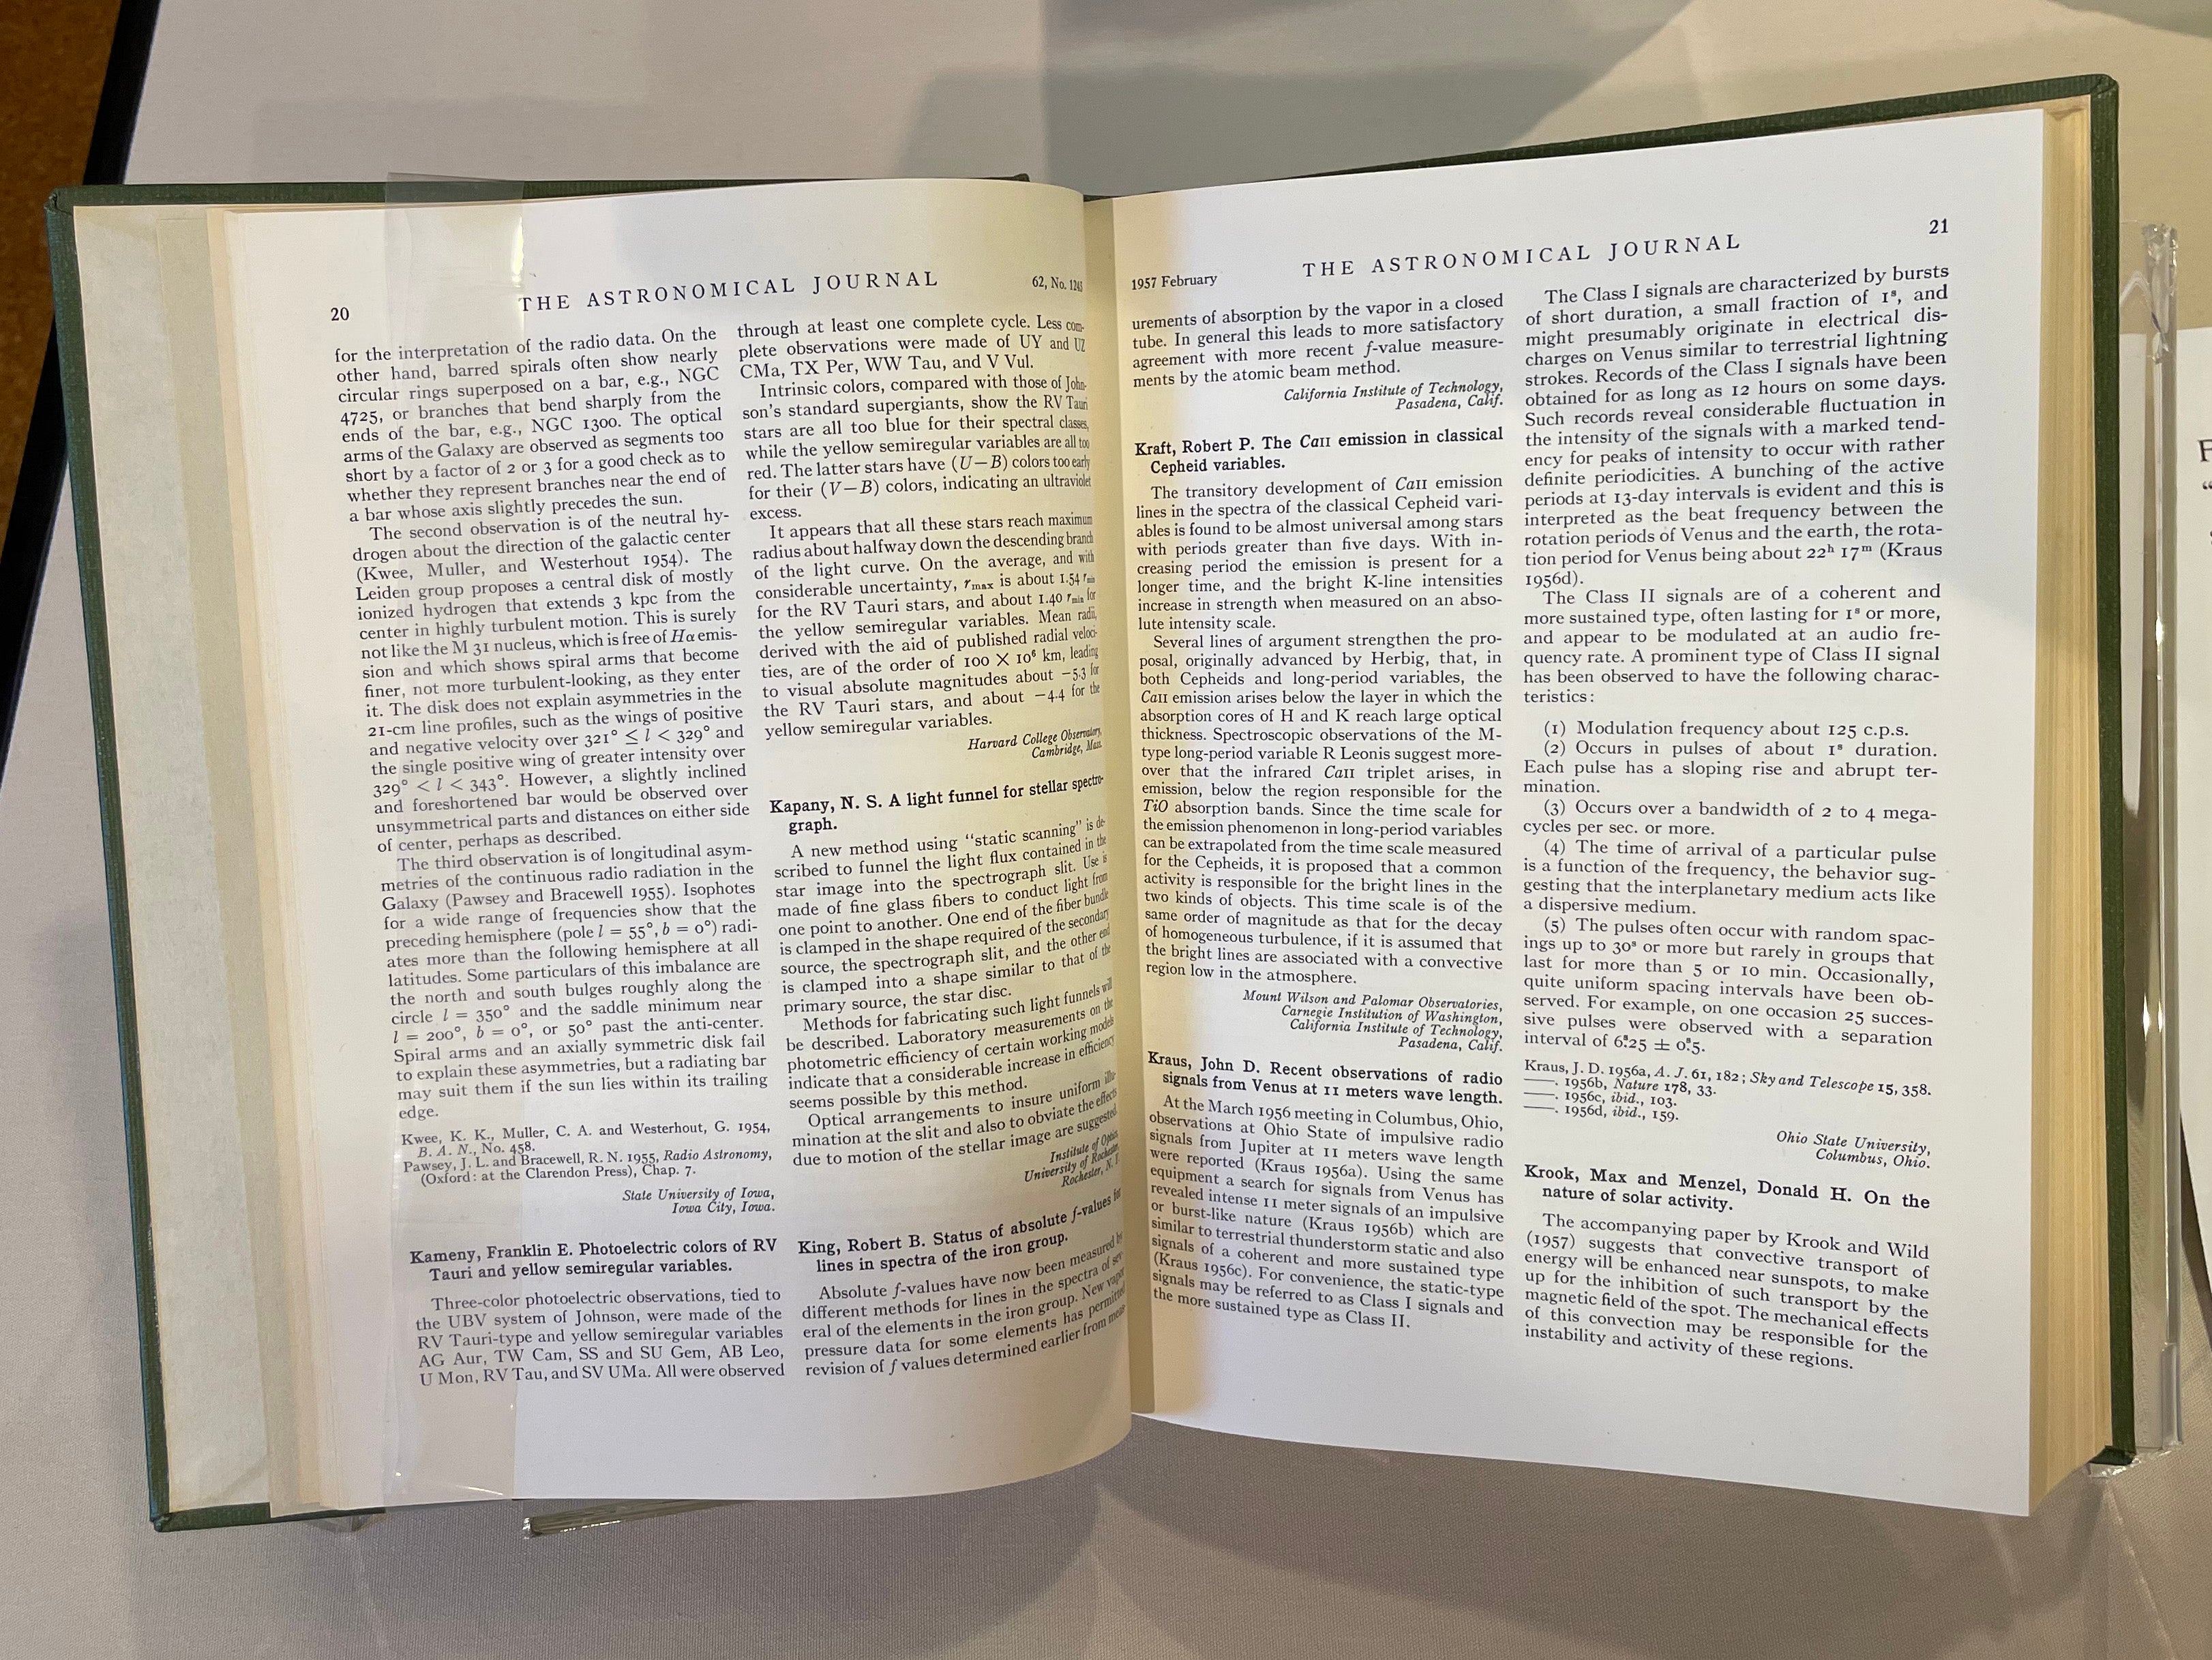 Photo of journal containing writing by Frank Kameny, “Photoelectric colors of RV Tauri and yellow semiregular variables.” Astronomical Journal. New Haven, 1957.